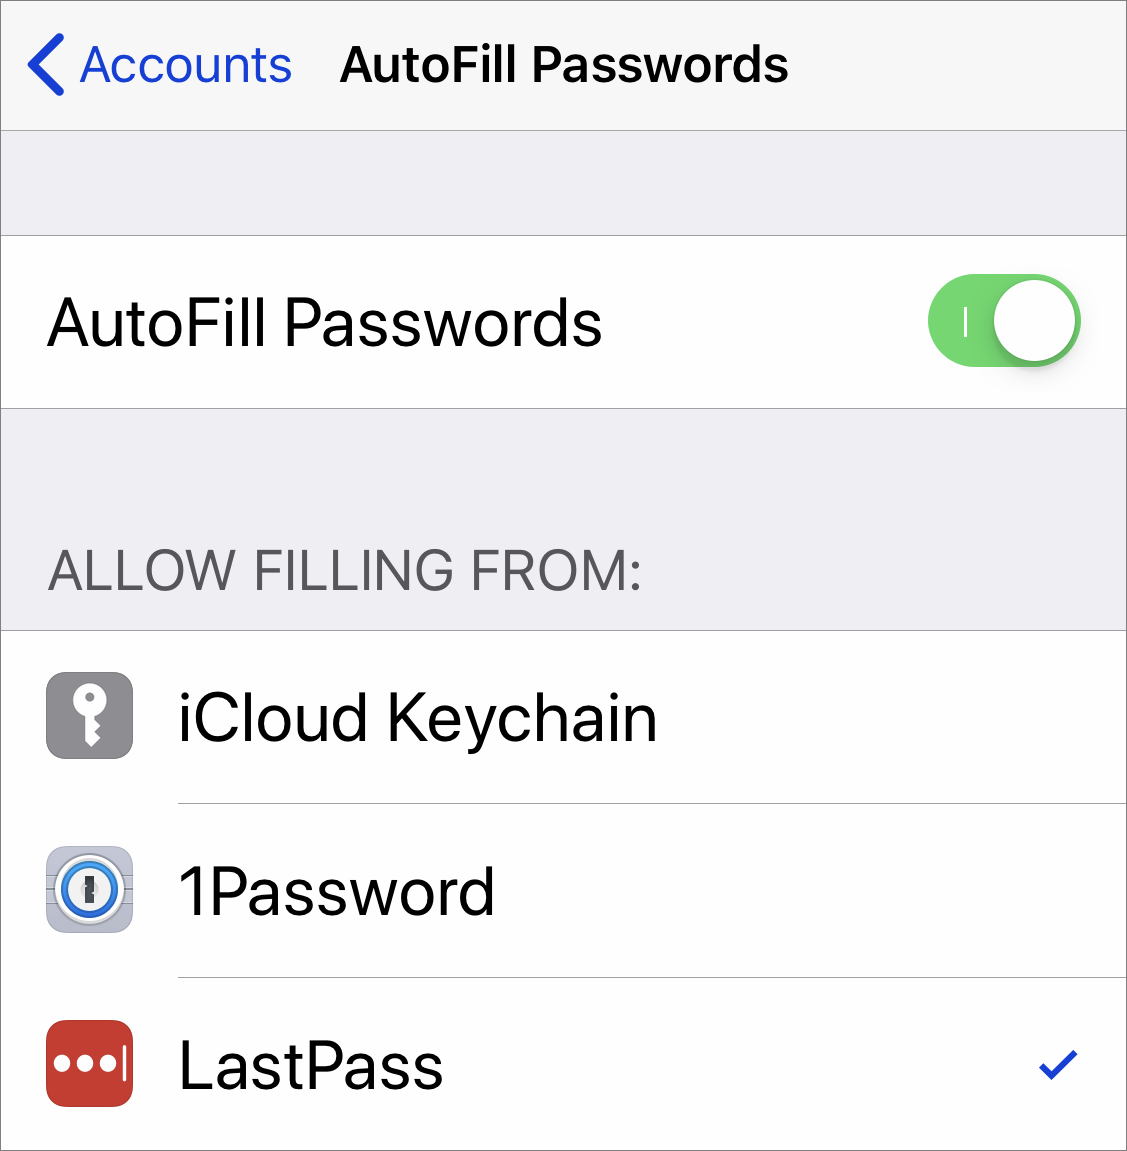 free PassFab iOS Password Manager 2.0.8.6 for iphone download